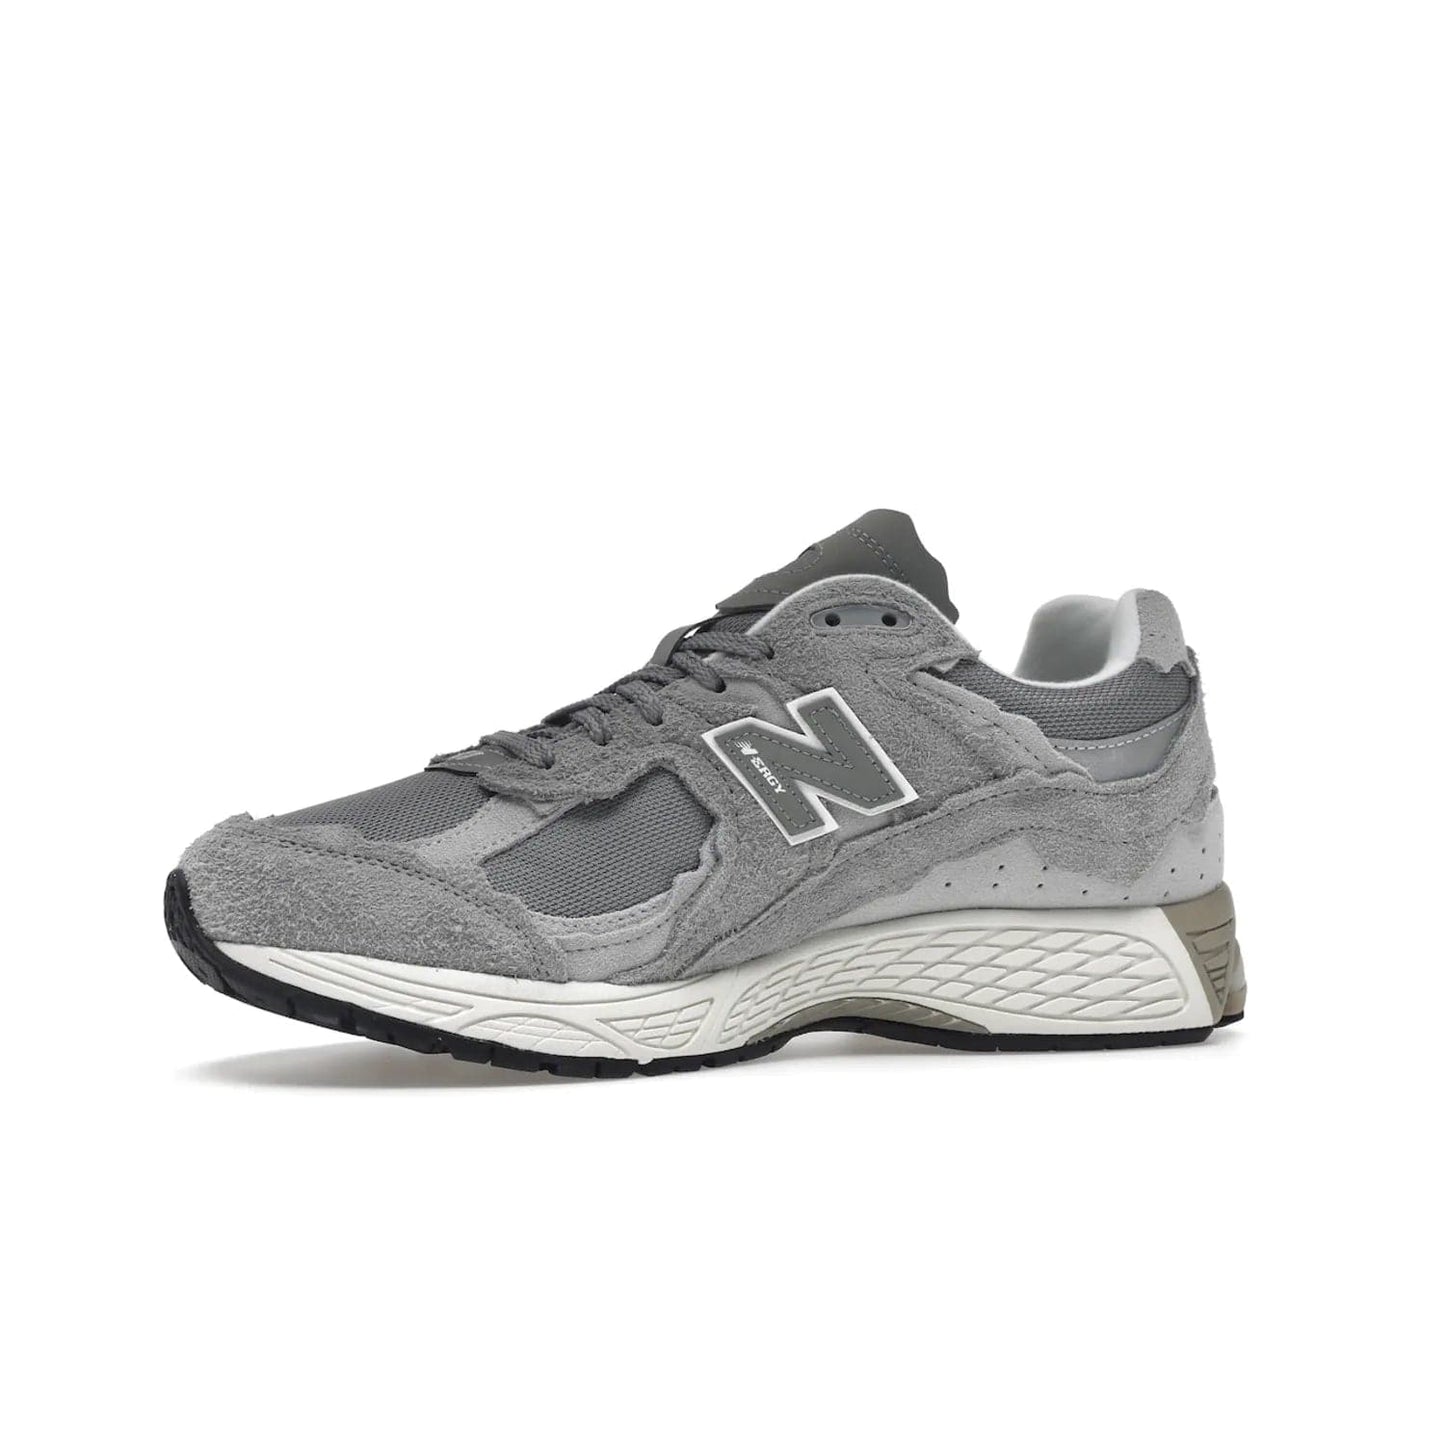 New Balance 2002R Protection Pack Grey - Image 17 - Only at www.BallersClubKickz.com - The New Balance 2002R Protection Pack Grey provides superior protection and all-day comfort. It features a blend of synthetic and mesh materials, foam midsole, rubber outsole, and a toe cap and heel counter. Show off the classic "N" logo and "2002R" lettering. Get a pair on February 14, 2023 for protection and style.